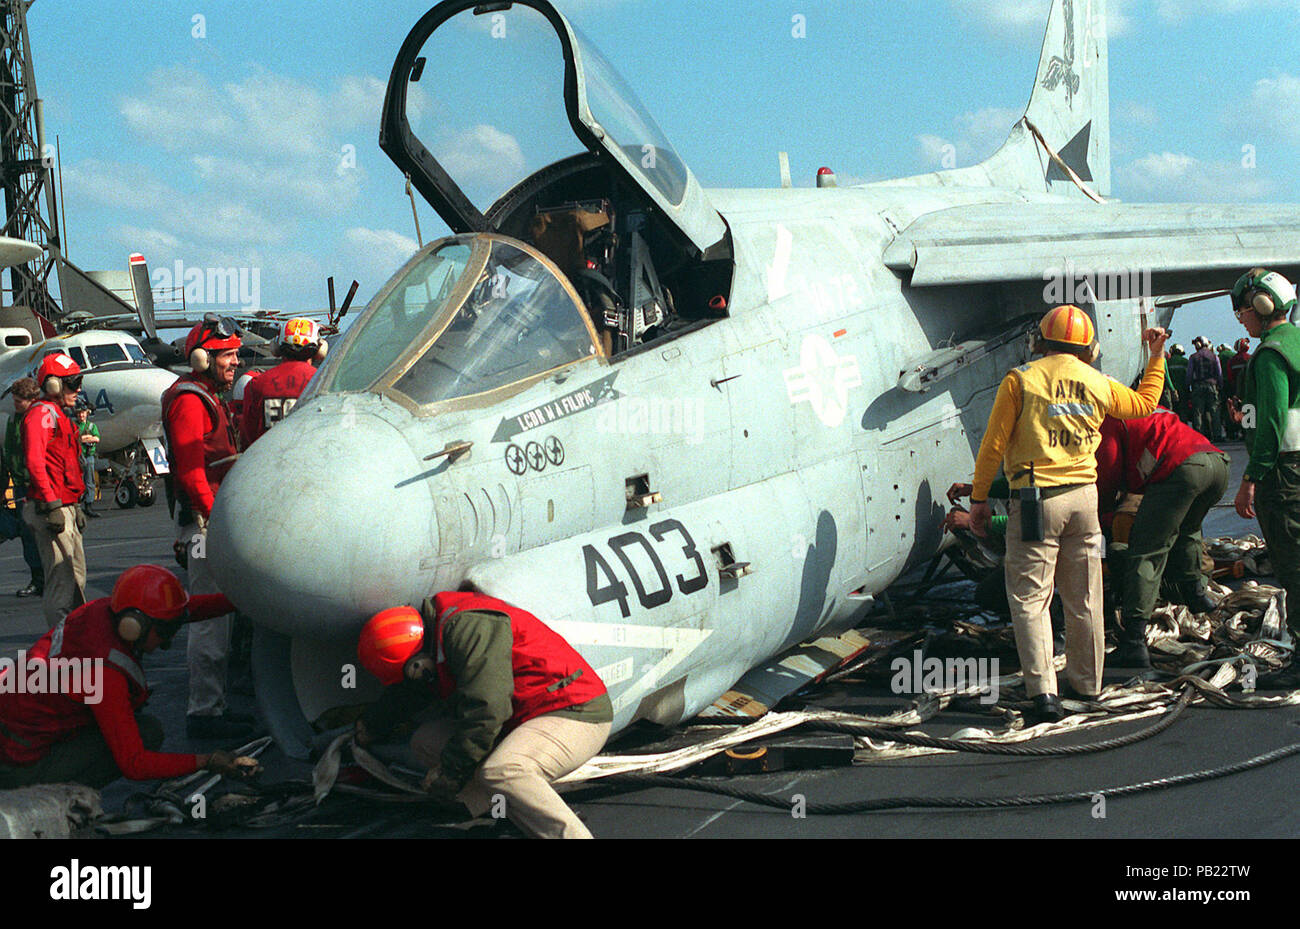 A-7E VA-72 barricade crash on USS Kennedy (CV-67) 1991. Flight deck personnel work to secure an A-7E Corsair II aircraft after an emergency barricade landing on the aircraft carrier USS JOHN F. KENNEDY (CV-67).  The Attack Squadron 72 (VA-72) aircraft was returning from a mission over Iraq during Operation Desert Storm when a problem with the nose gear was detected. Stock Photo